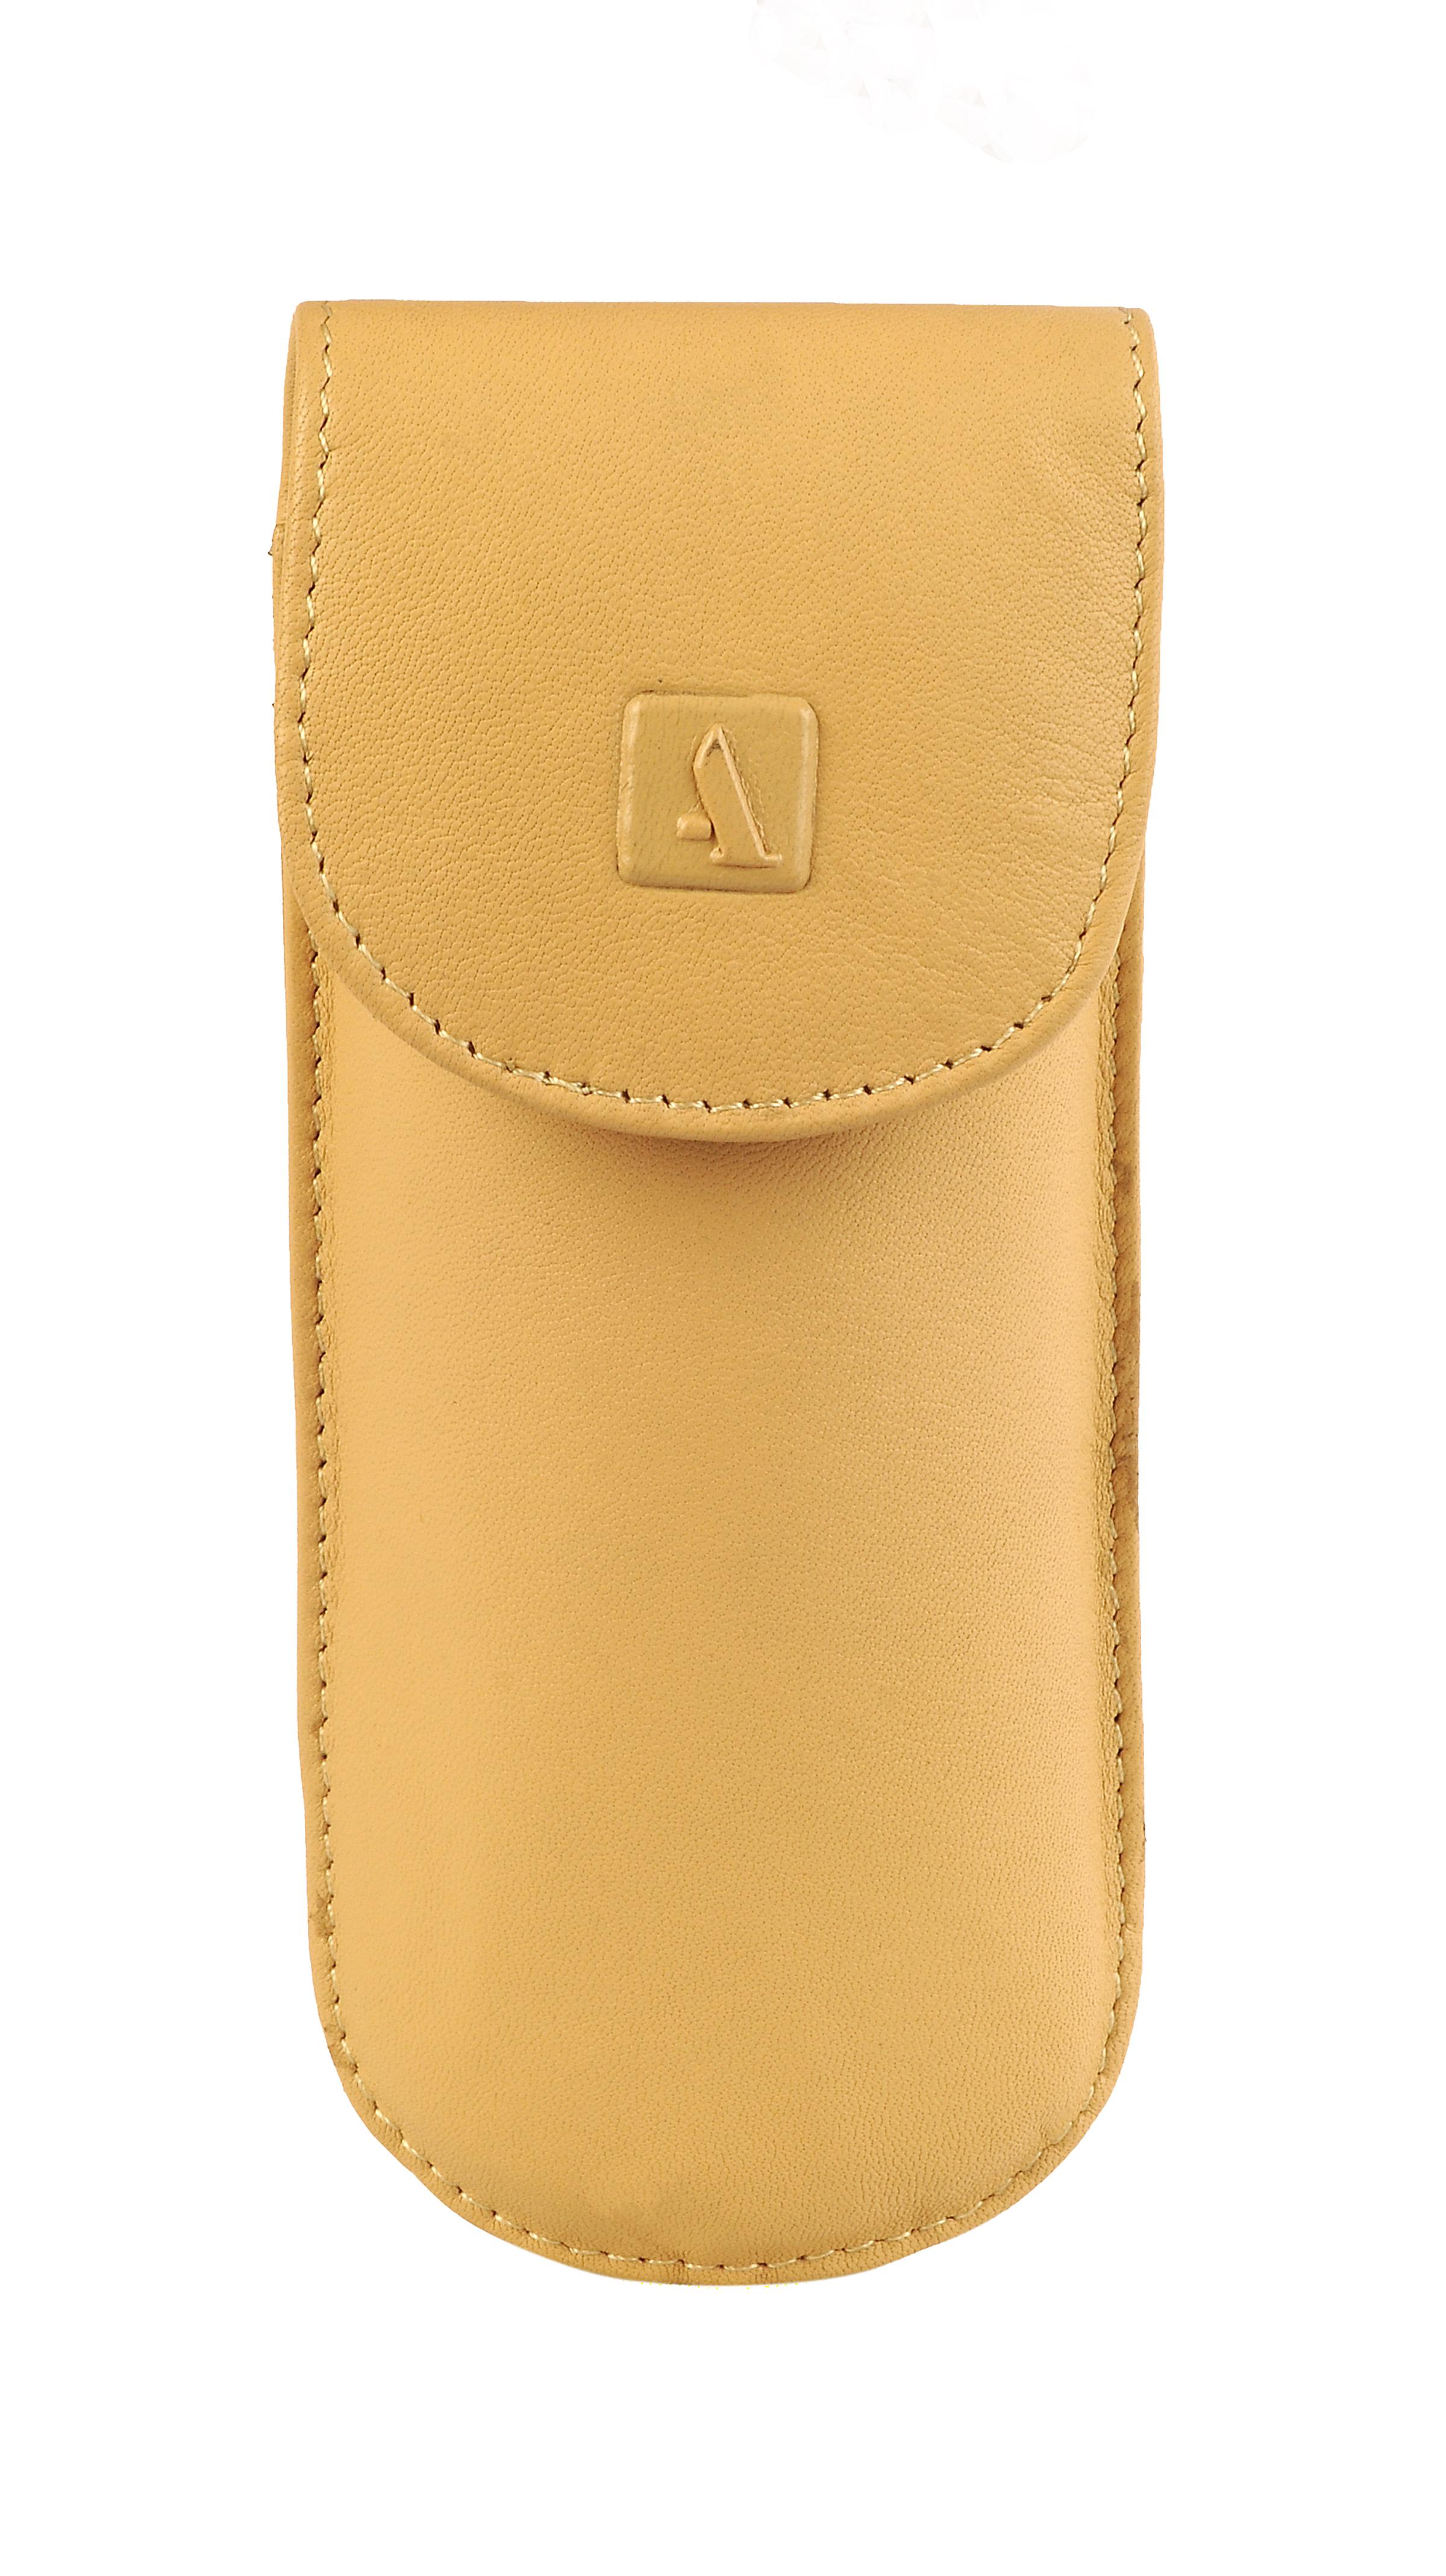 W74--Reading spectacle semi hard case in Genuine Leather - Gold